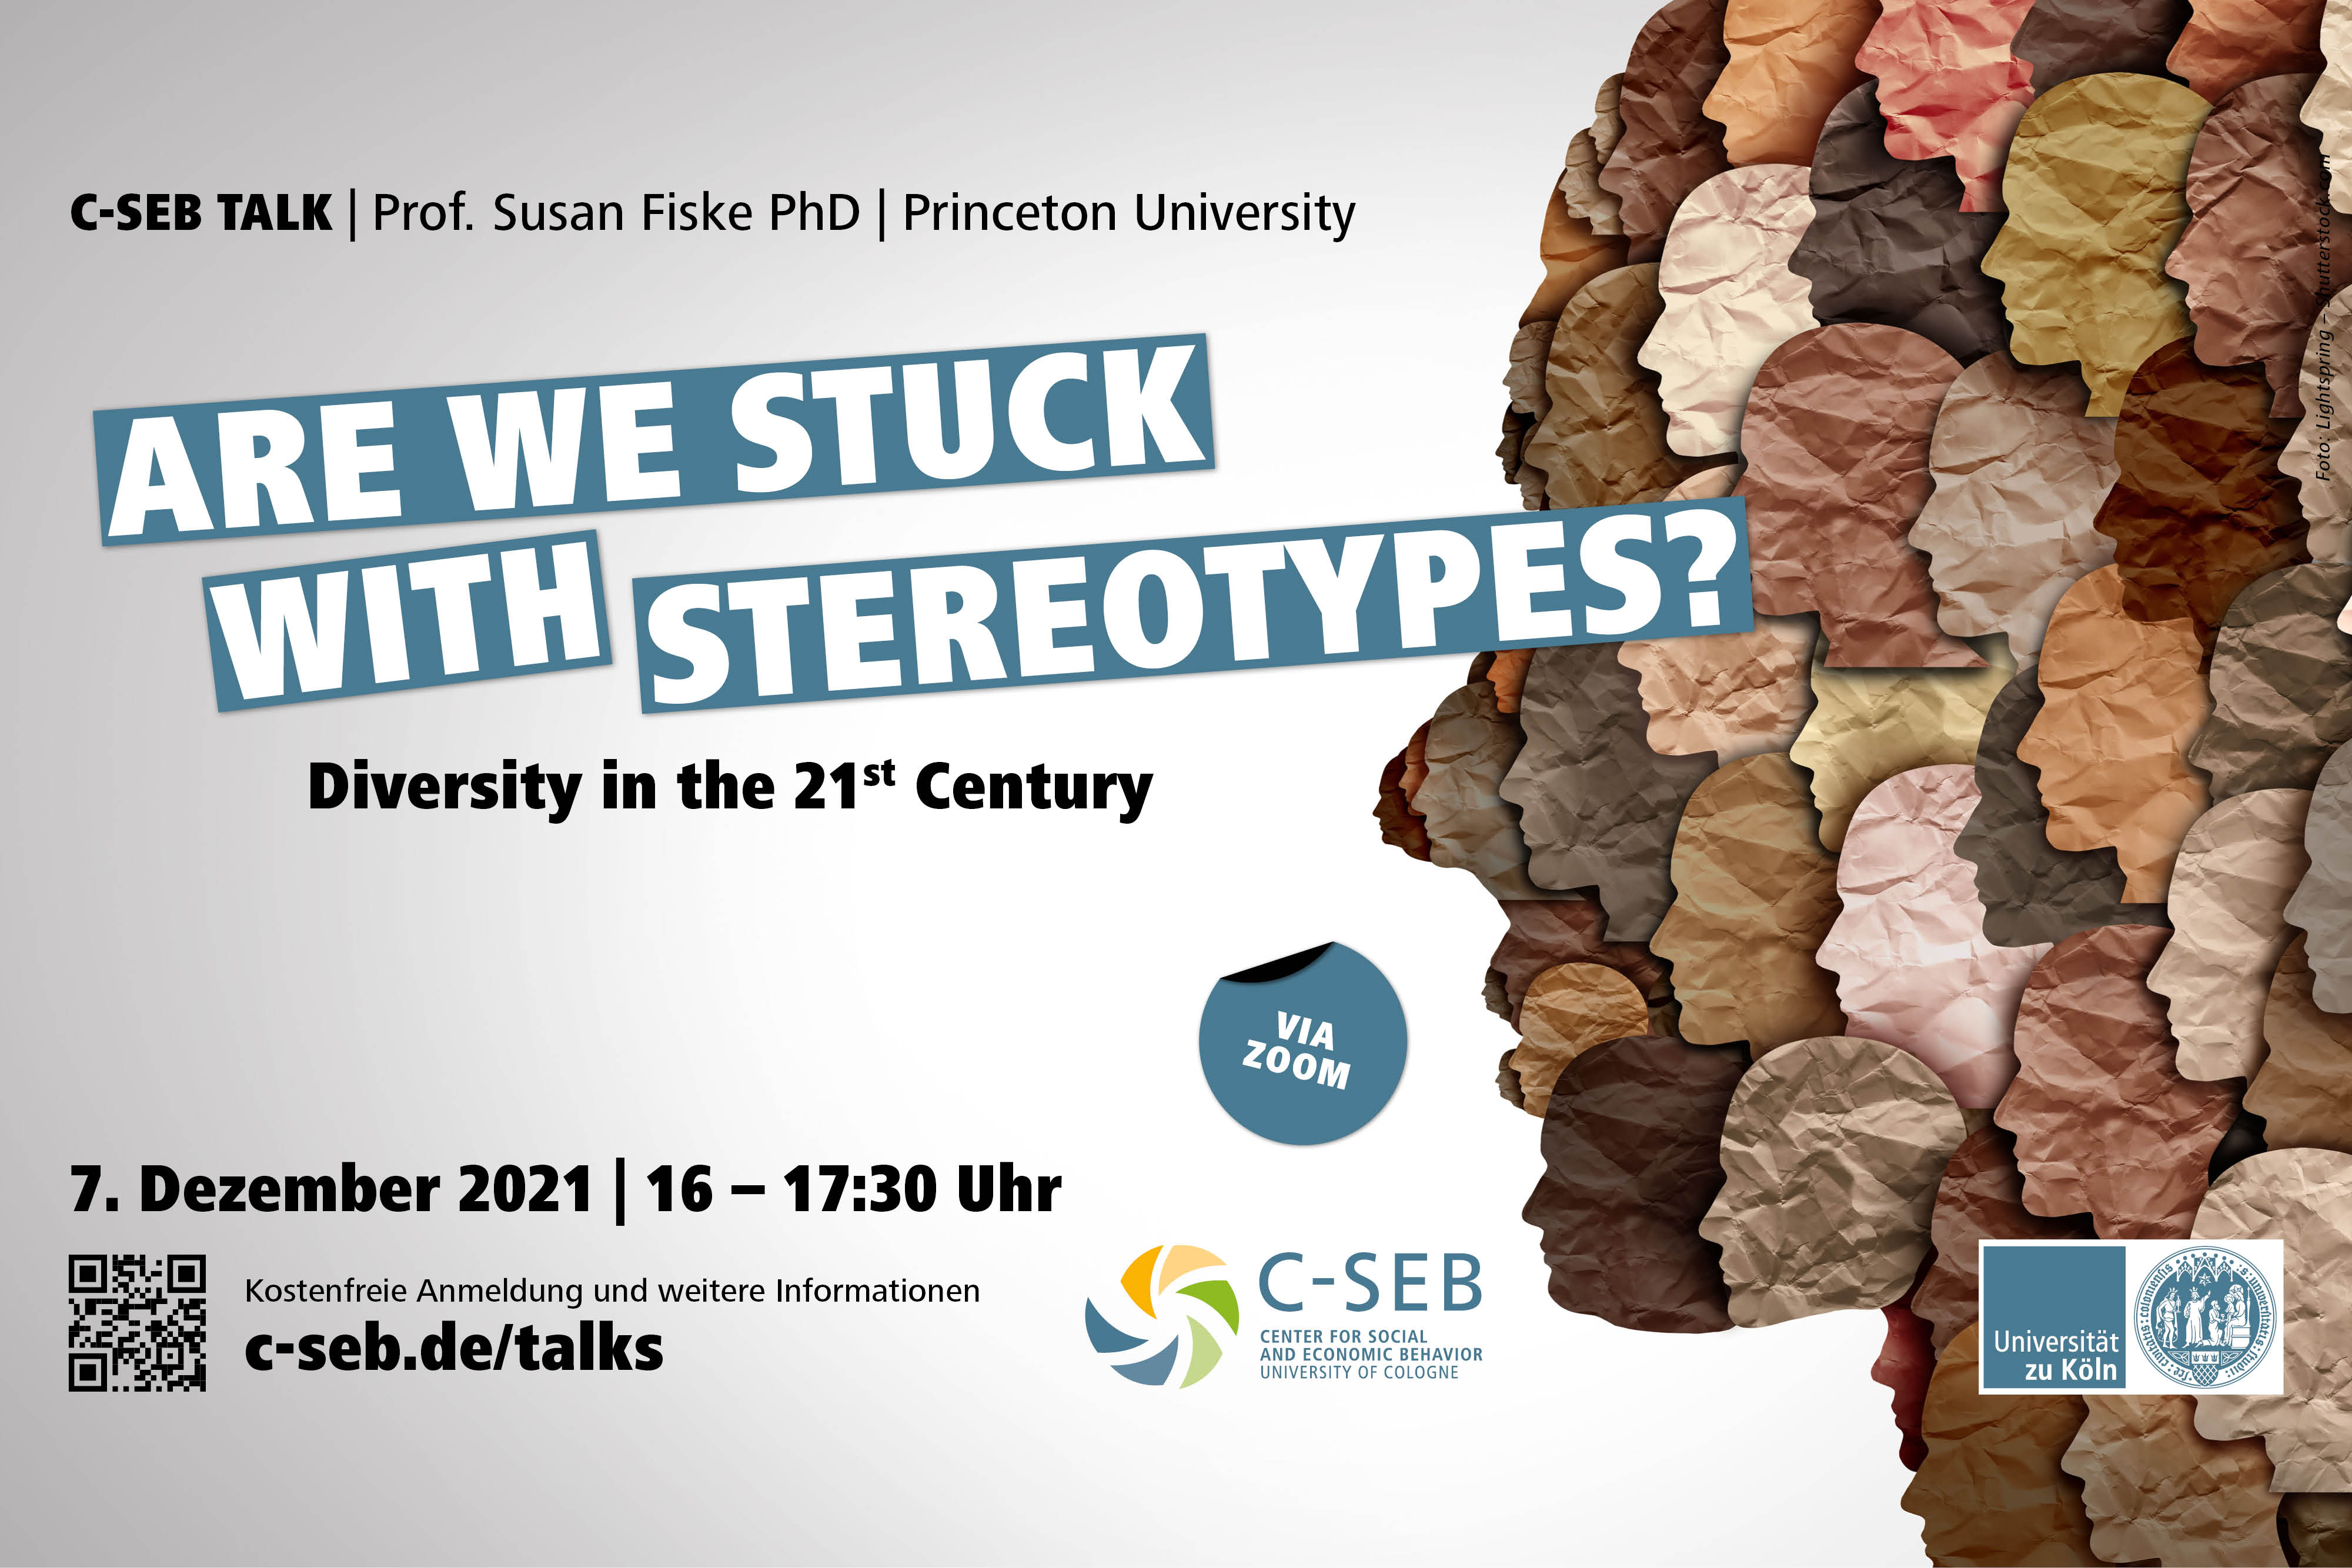 Poster for the C-SEB Talk by Susan Fiske on Dec 7, 2021.